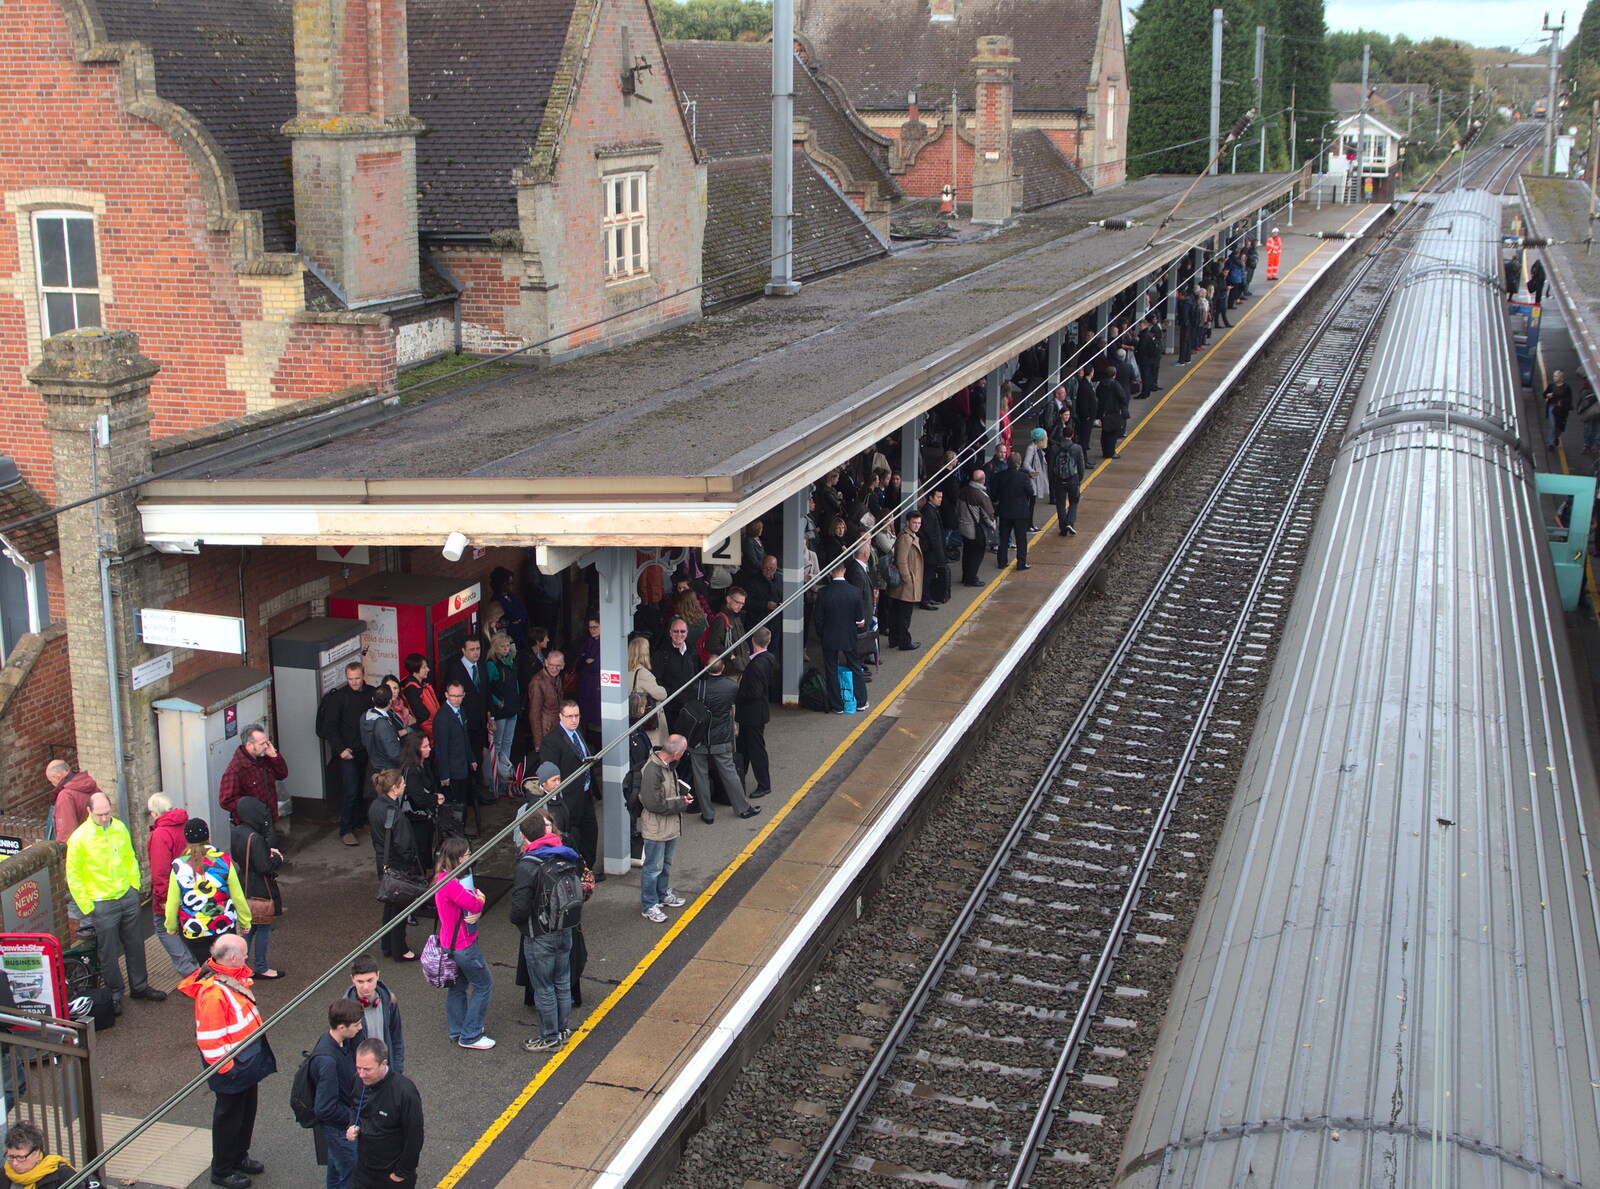 The crowded Platform 2 at Stowmarket from (Very) Long Train (Not) Running, Stowmarket, Suffolk - 21st October 2014